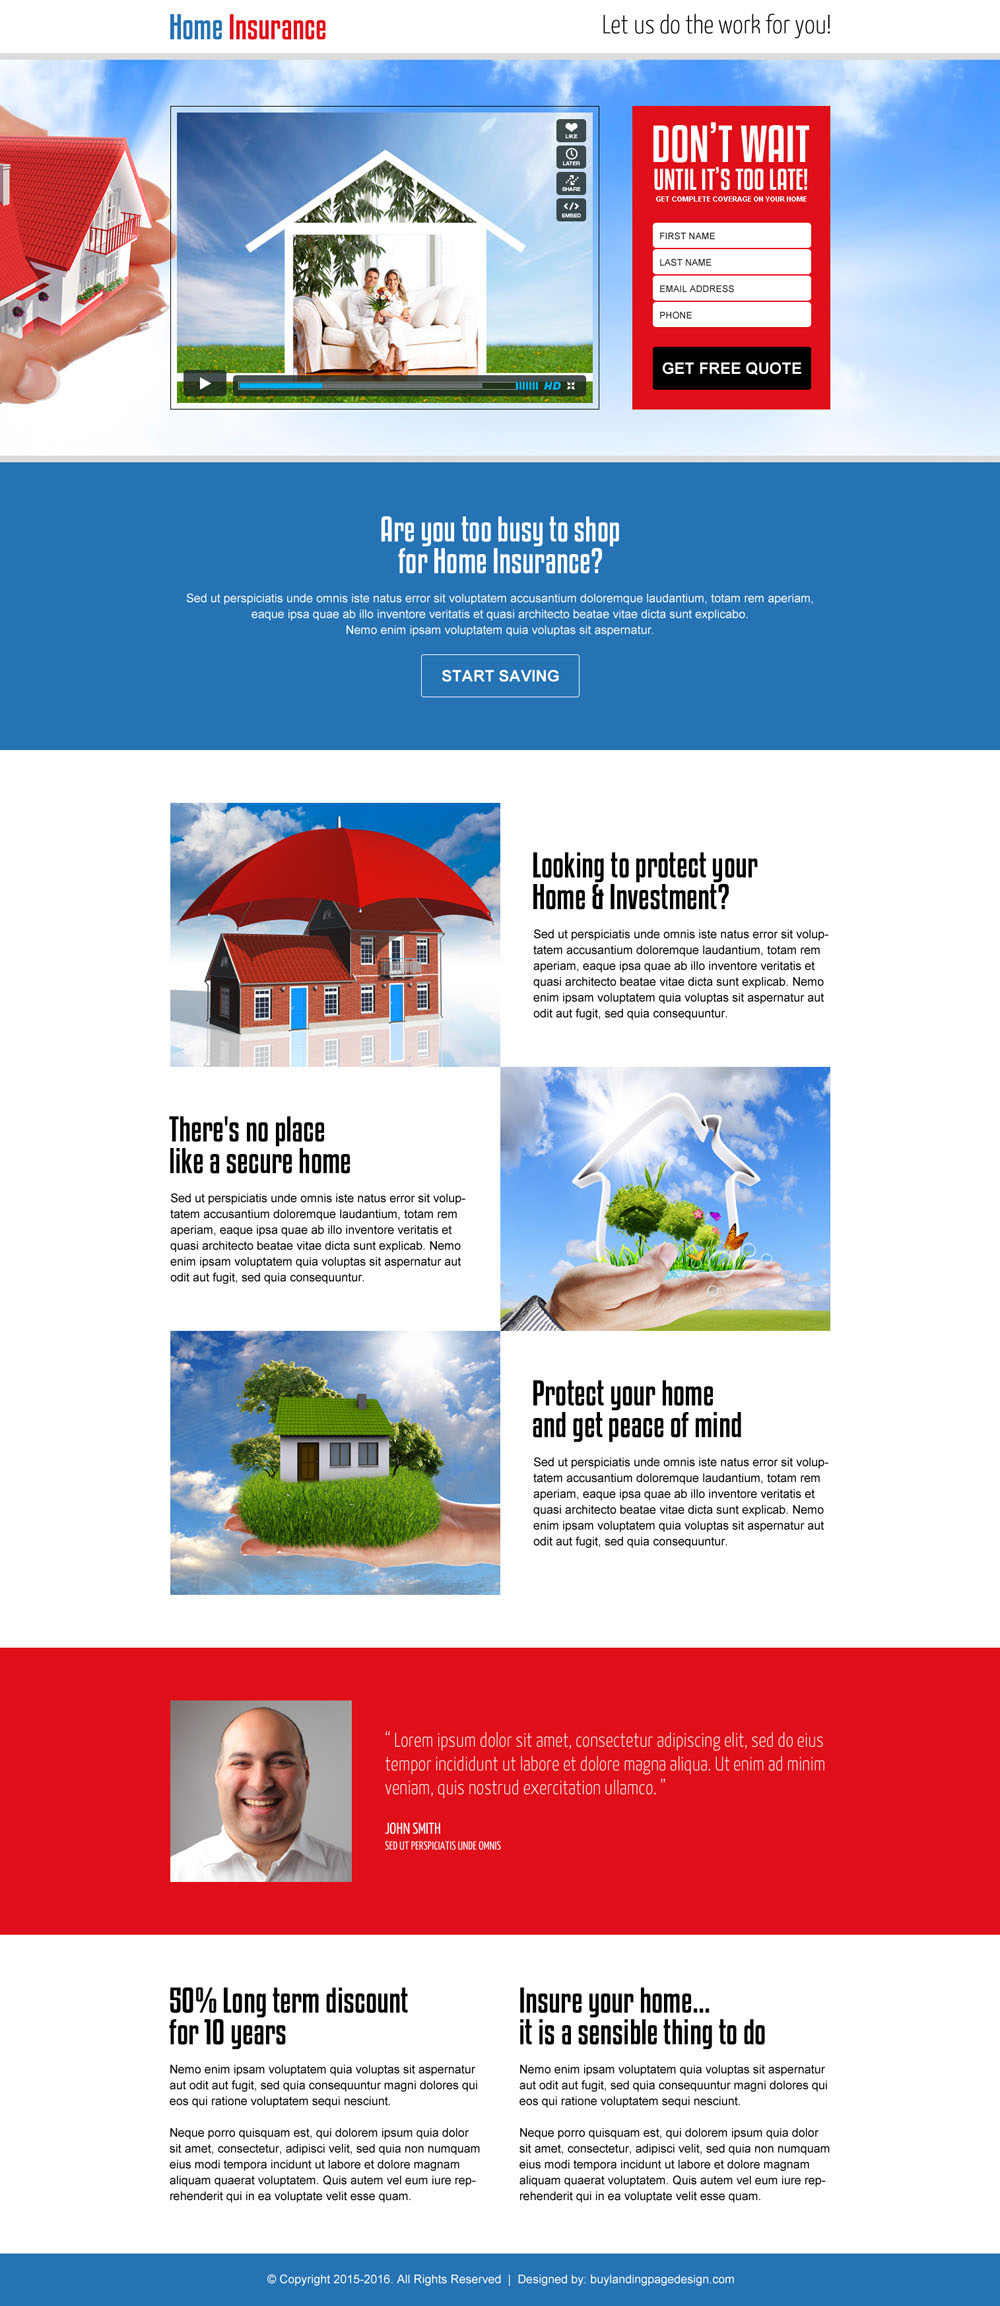 home-insurance-lead-generation-responsive-video-landing-page-design-005